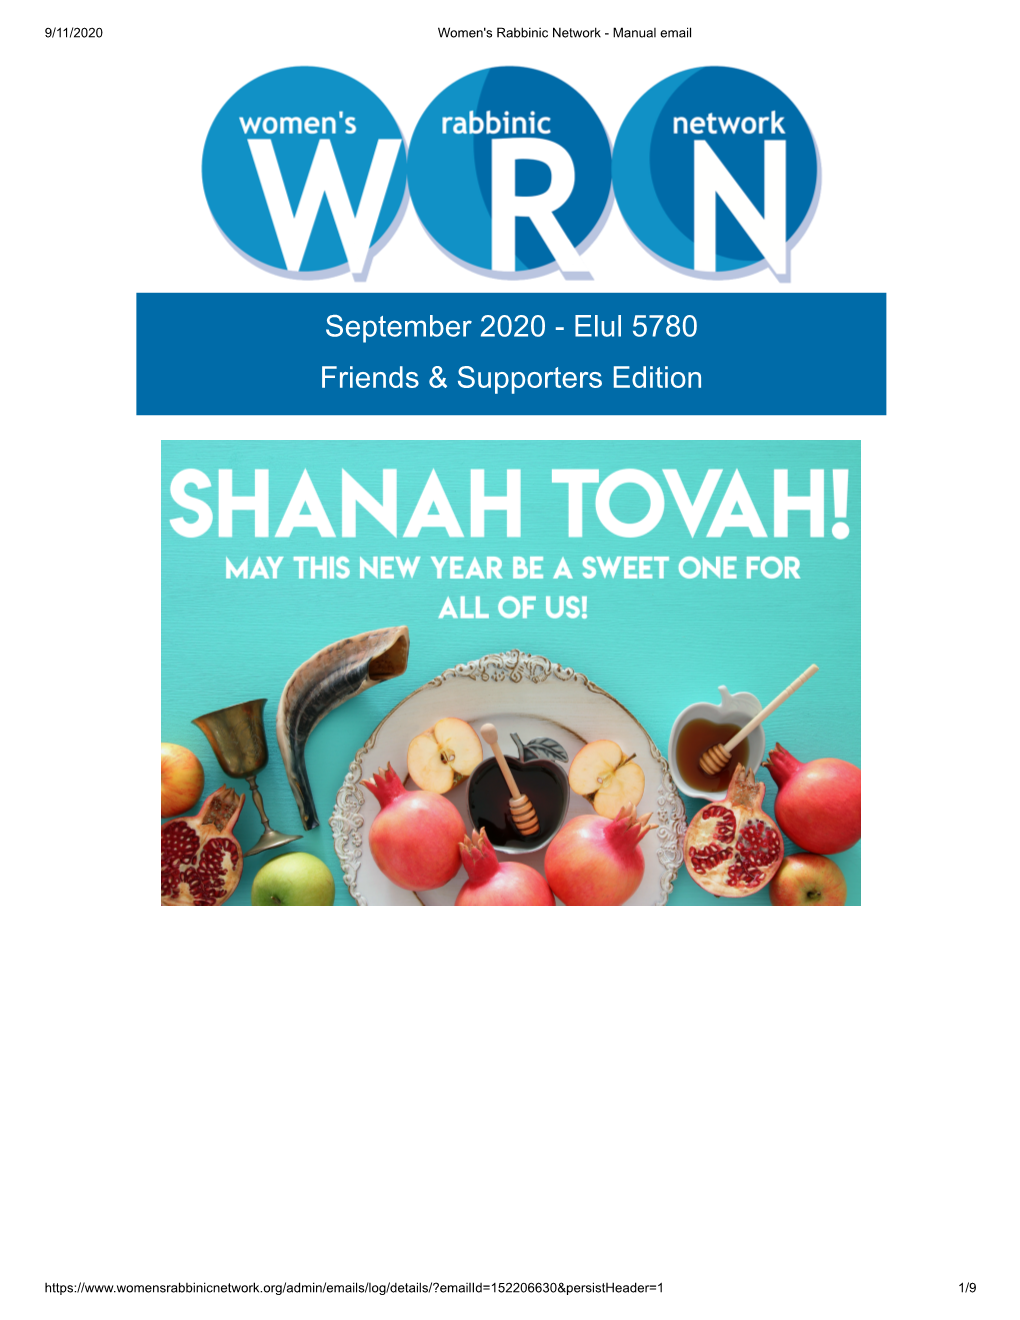 September 2020 - Elul 5780 Friends & Supporters Edition